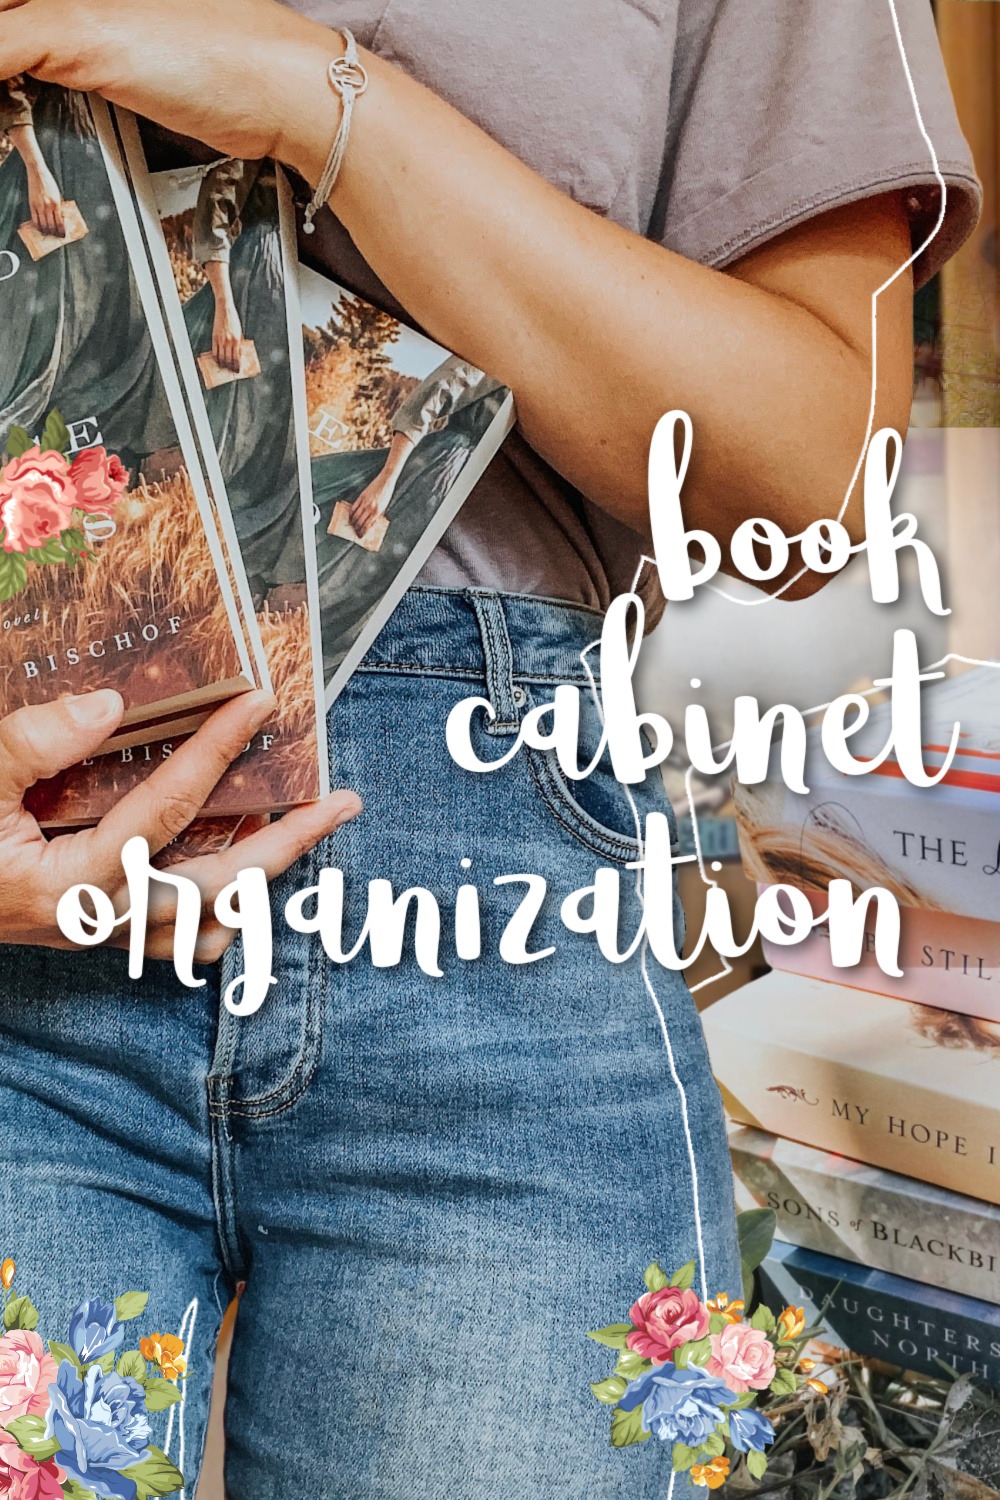 book cabinet organization | Organize and declutter a book cabinet with dollar tree bins